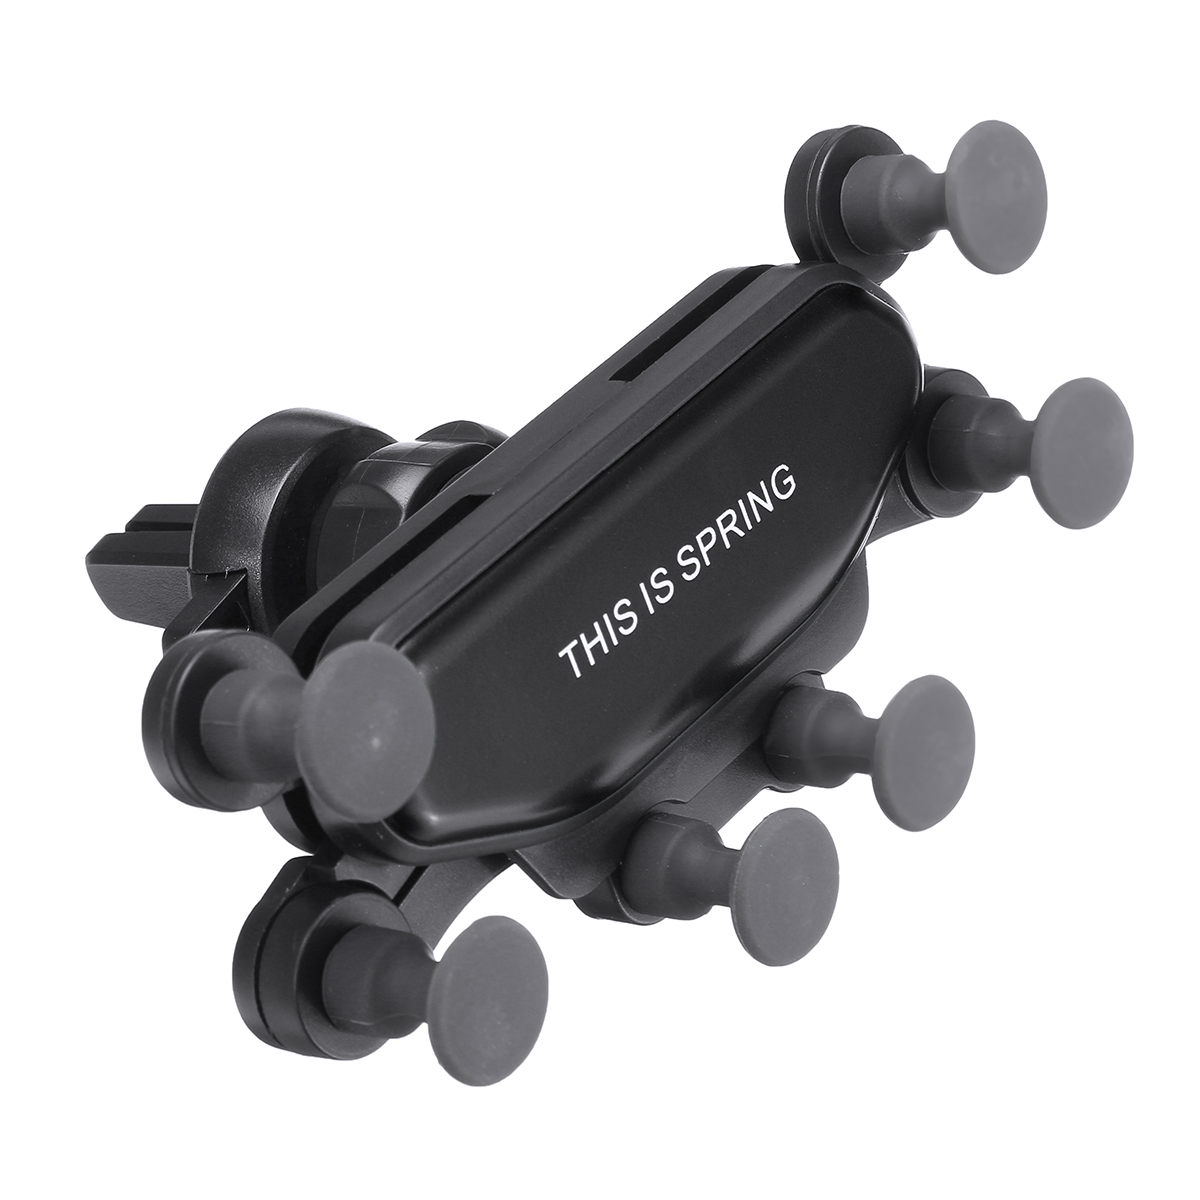 New Gravity Linkage Air Vent Car Phone Holder 360 Degree Rotation For 4.0-7.0 Inch Smart Phone 